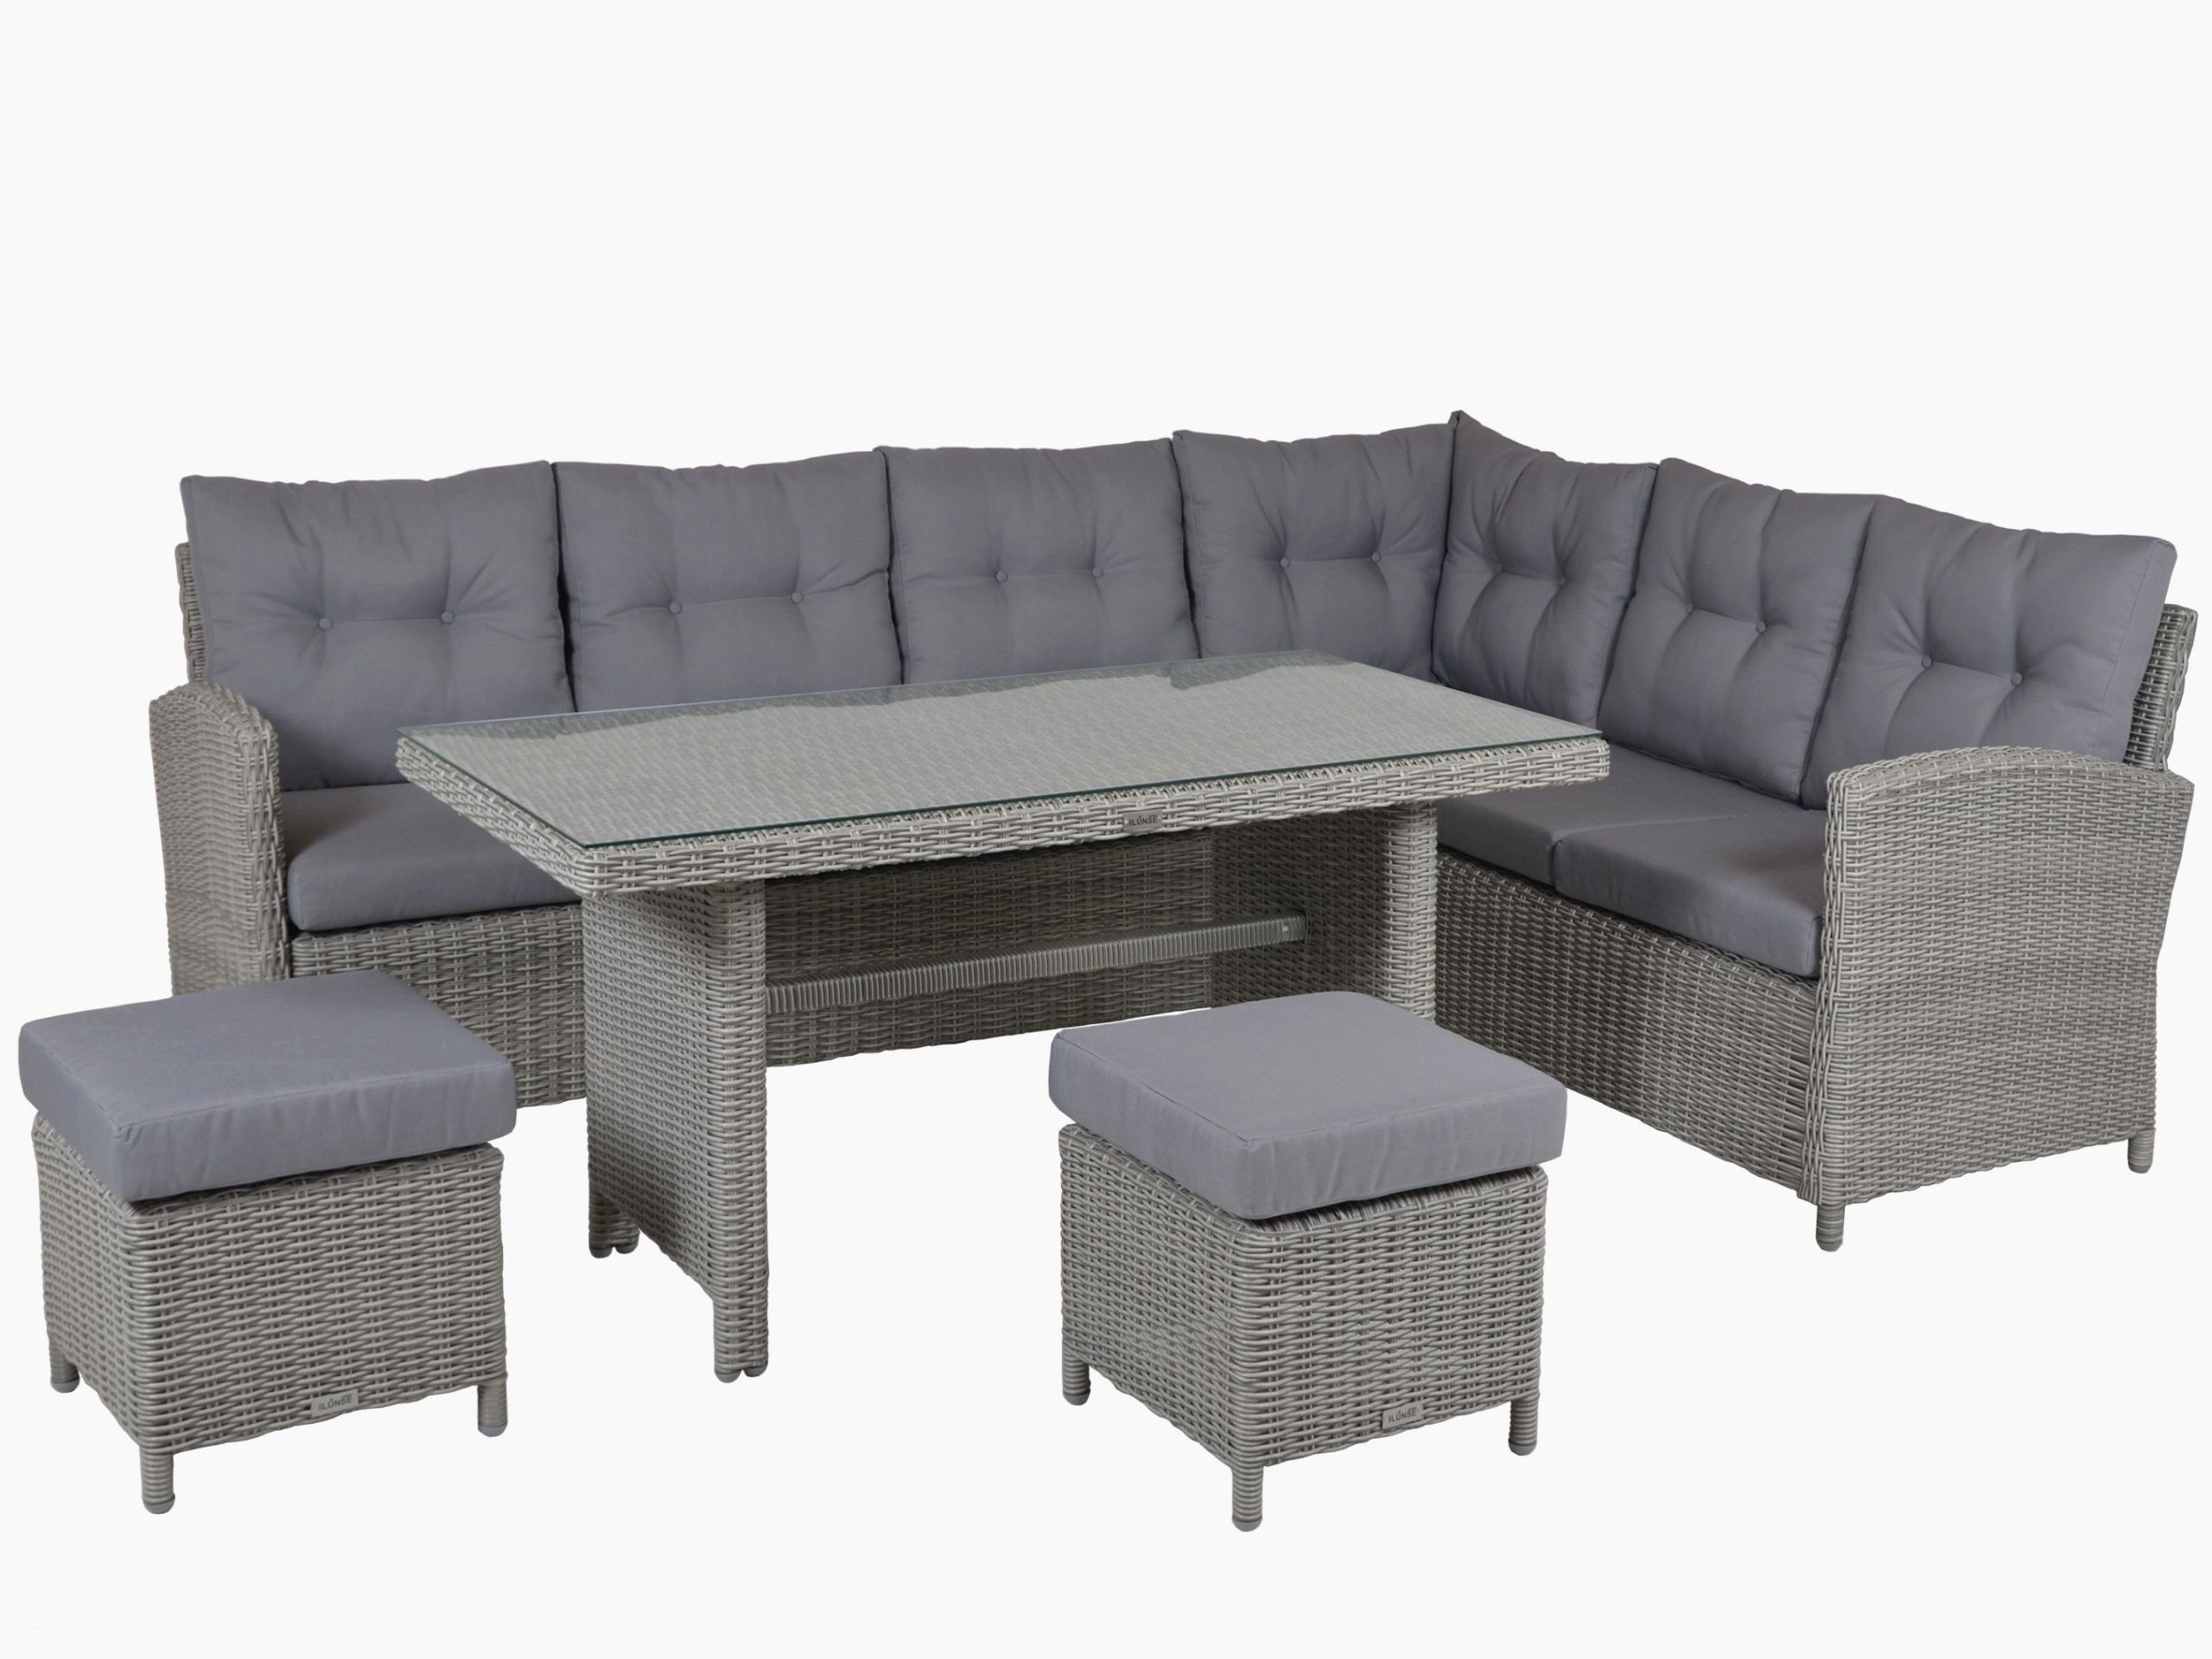 Coffee Table Best Of White Wicker Patio Coffee Table Collection Clearance Patio